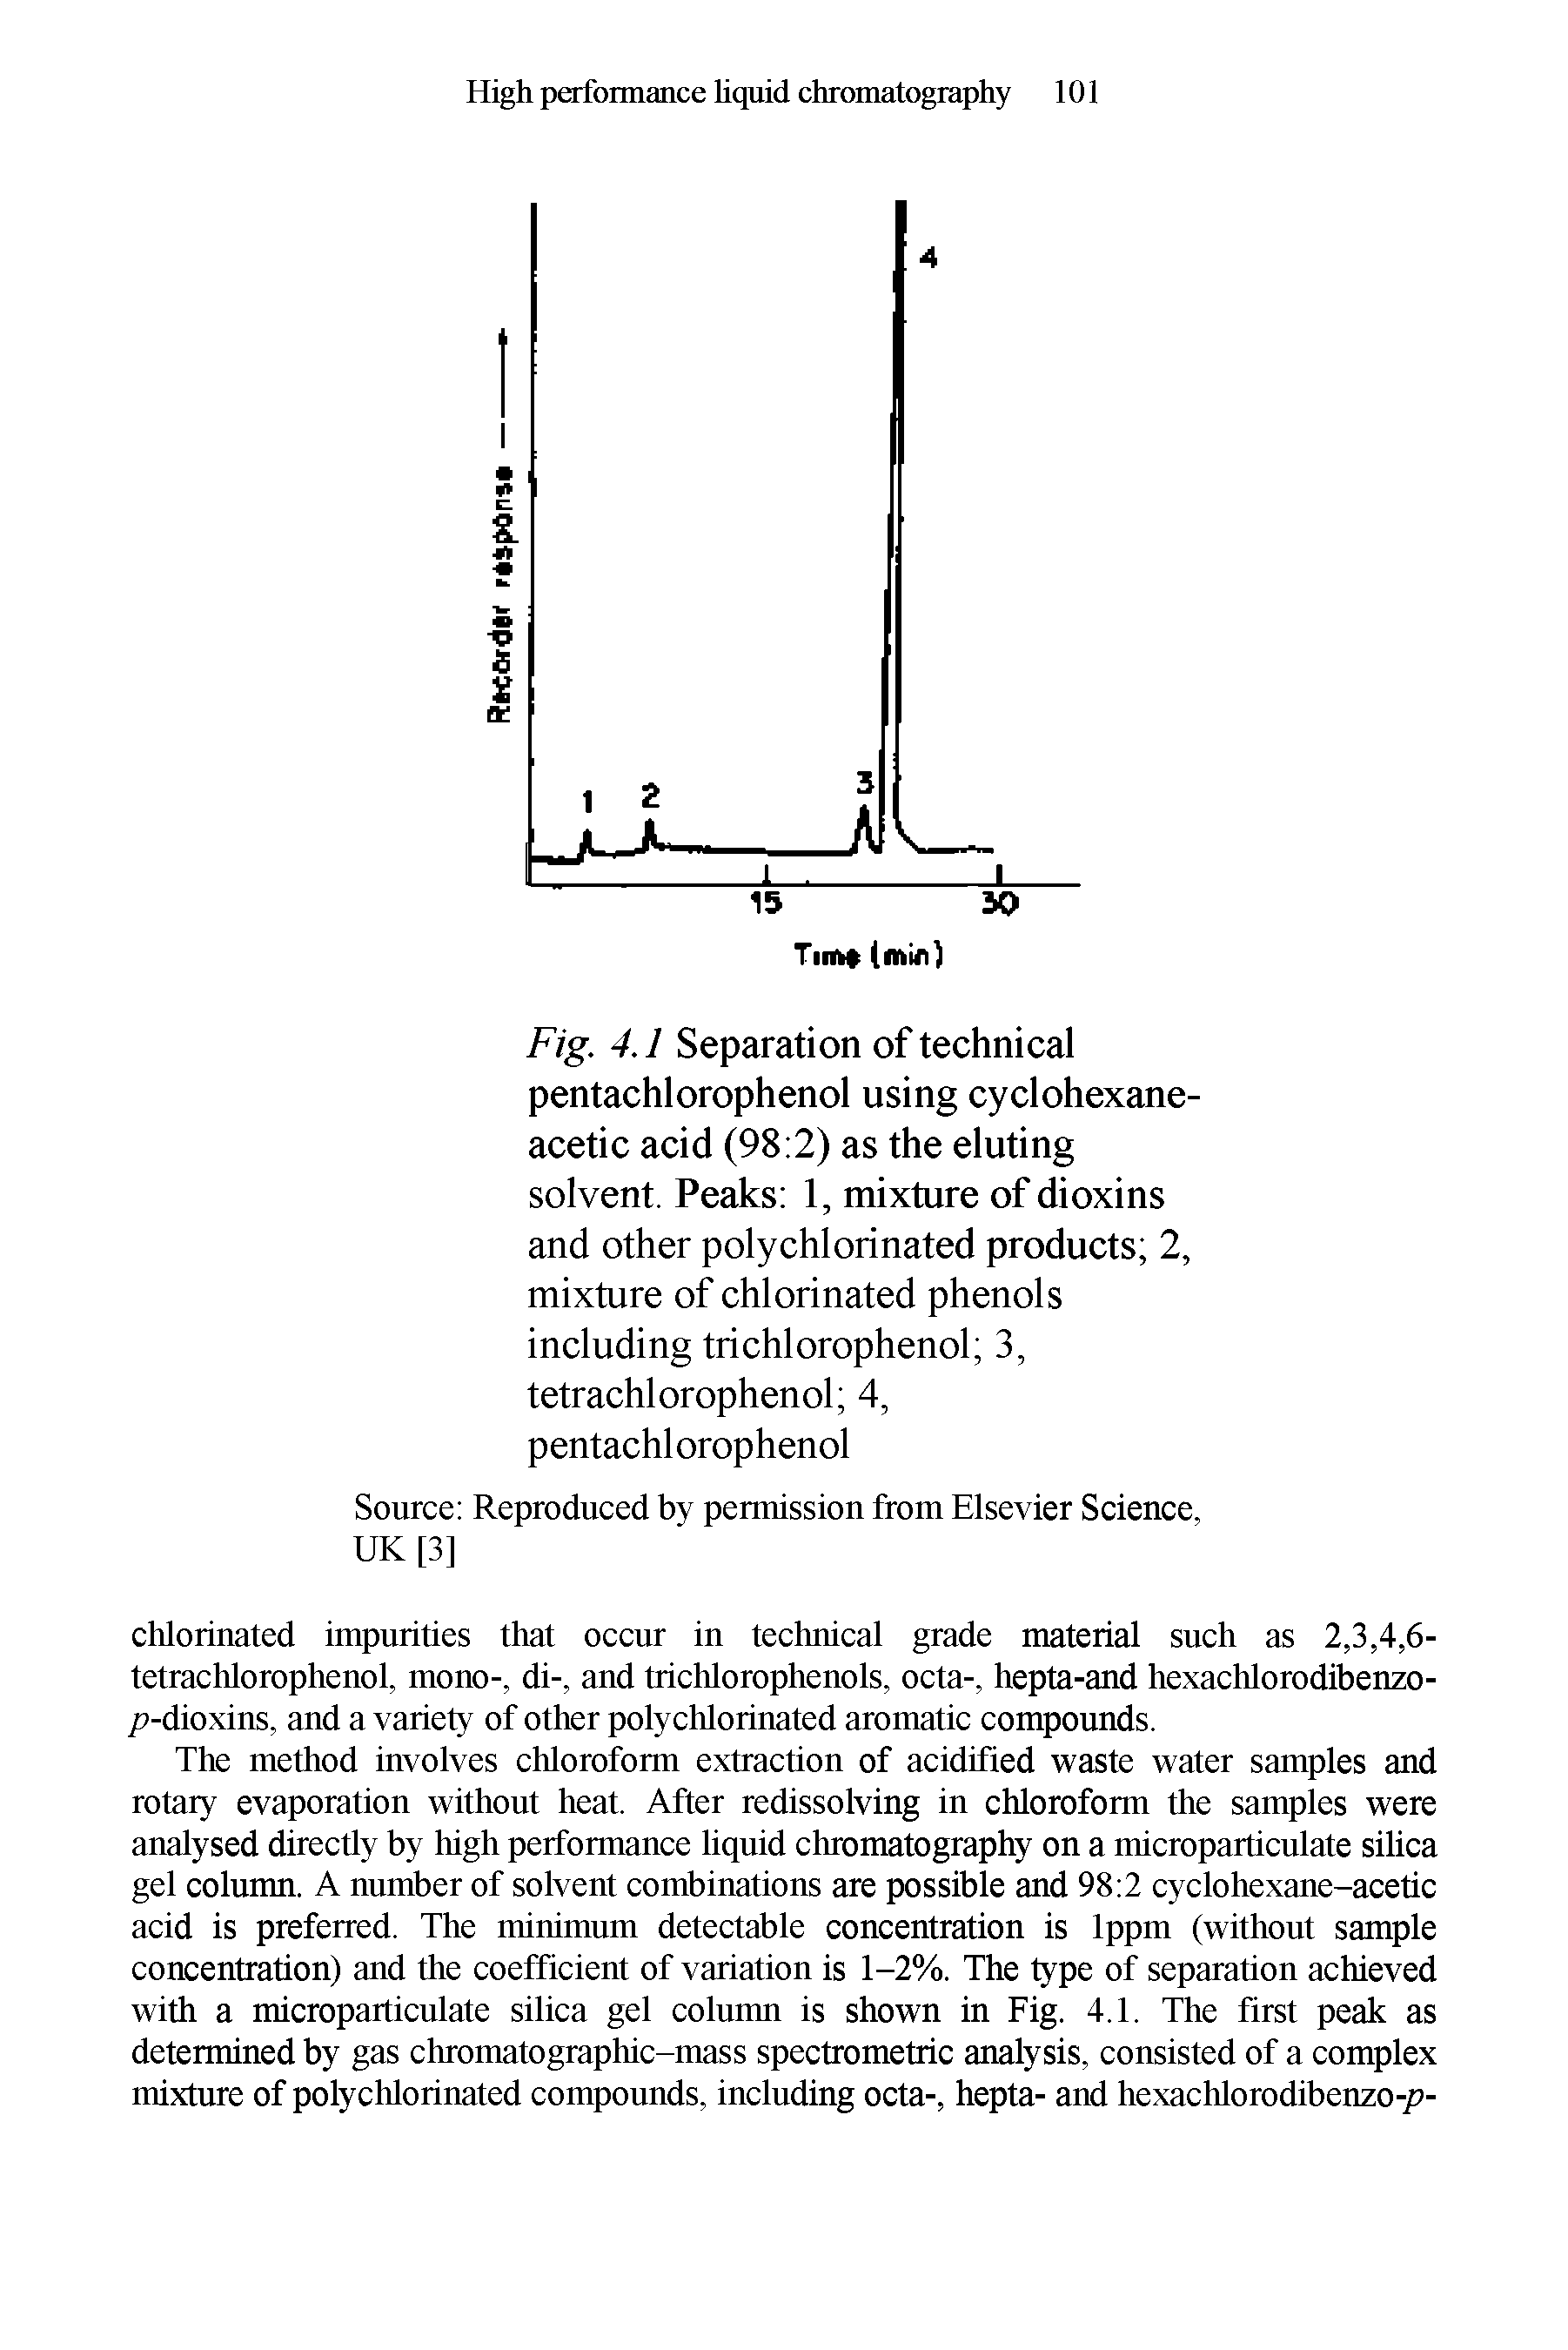 Fig. 4.1 Separation of technical pentachlorophenol using cyclohexane-acetic acid (98 2) as the eluting solvent. Peaks 1, mixture of dioxins and other polychlorinated products 2, mixture of chlorinated phenols including trichlorophenol 3, tetrachlorophenol 4, pentachlorophenol...